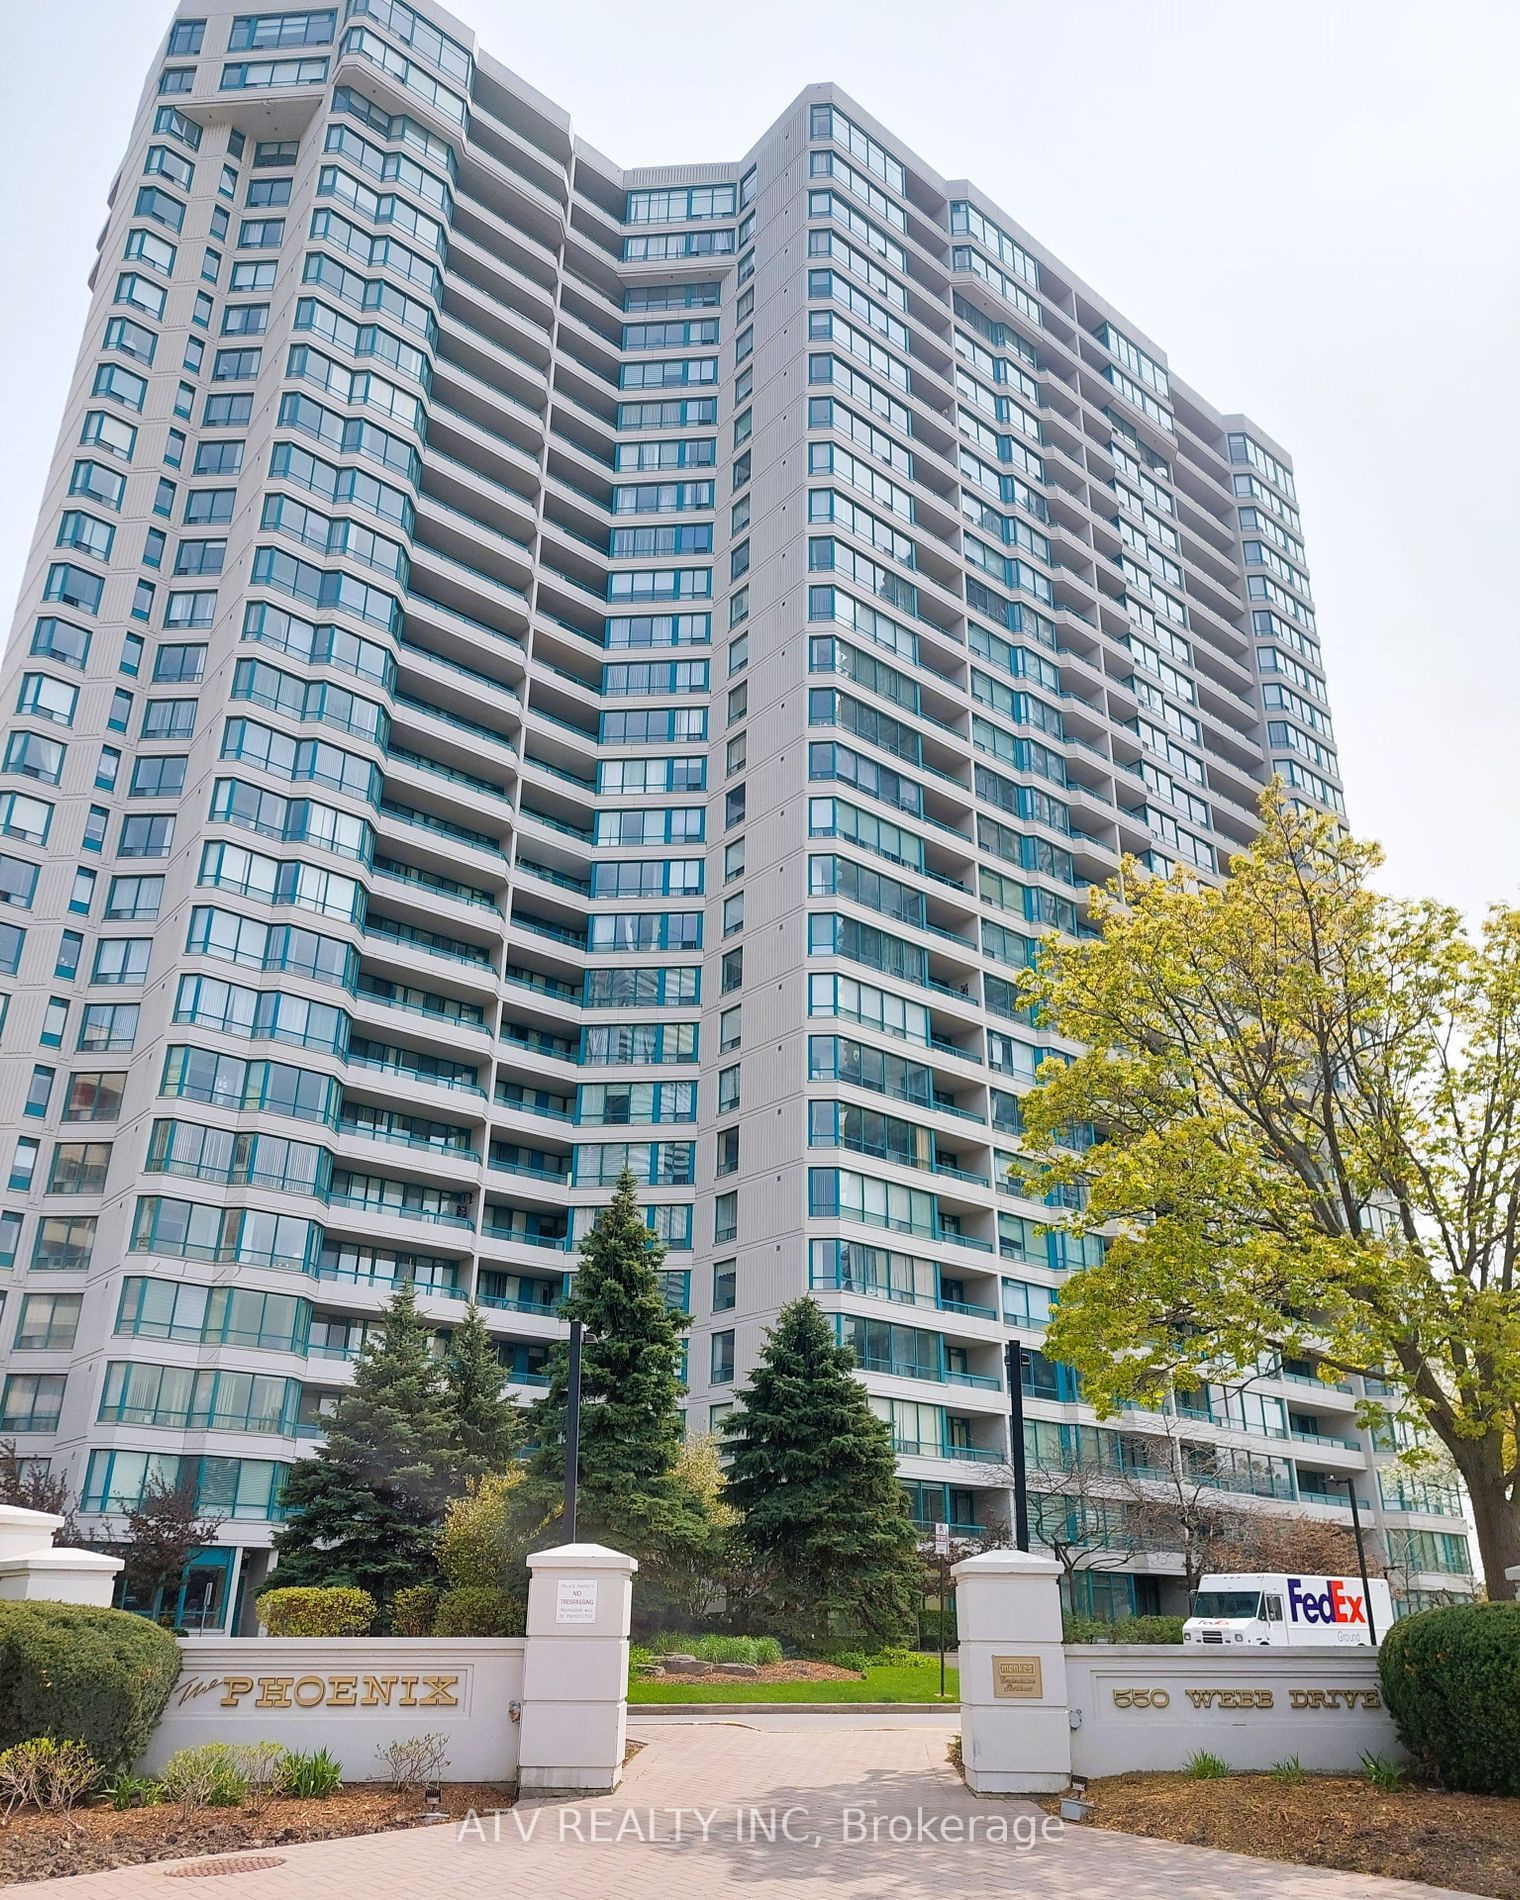 Condo Apt house for sale at 550 Webb Dr Mississauga Ontario